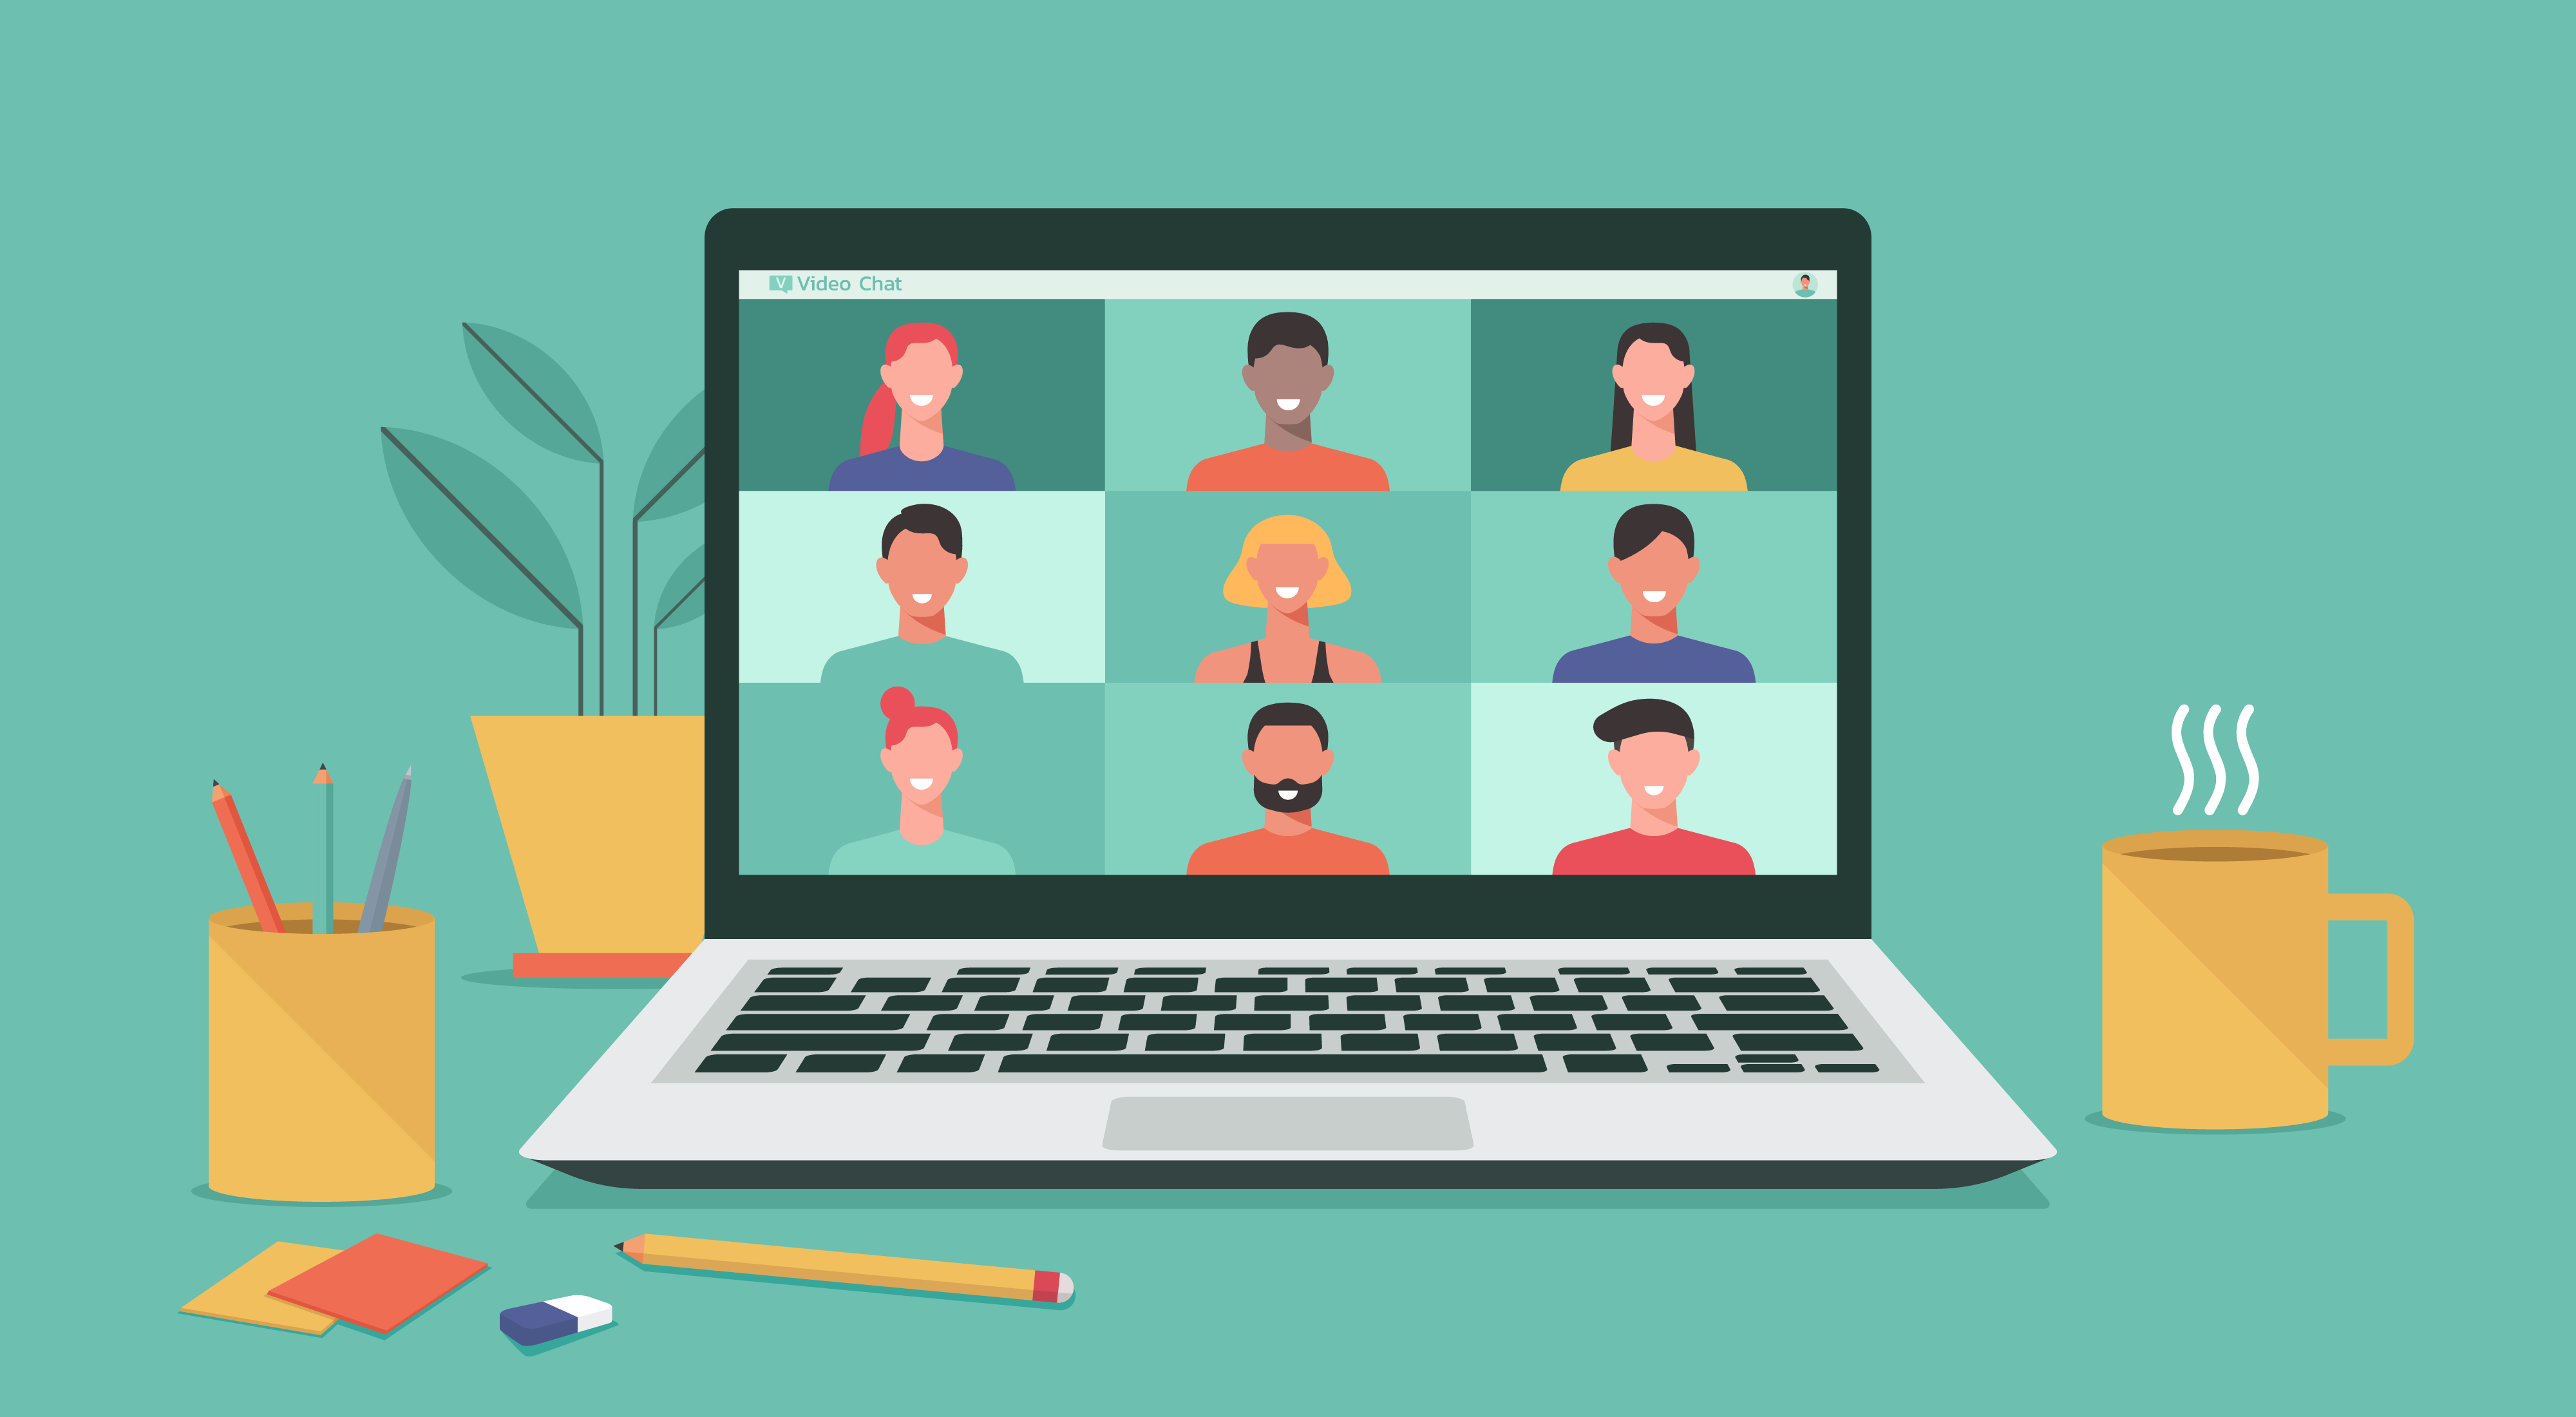 People,Connecting,Together,,Learning,Or,Meeting,Online,With,Teleconference,,Video